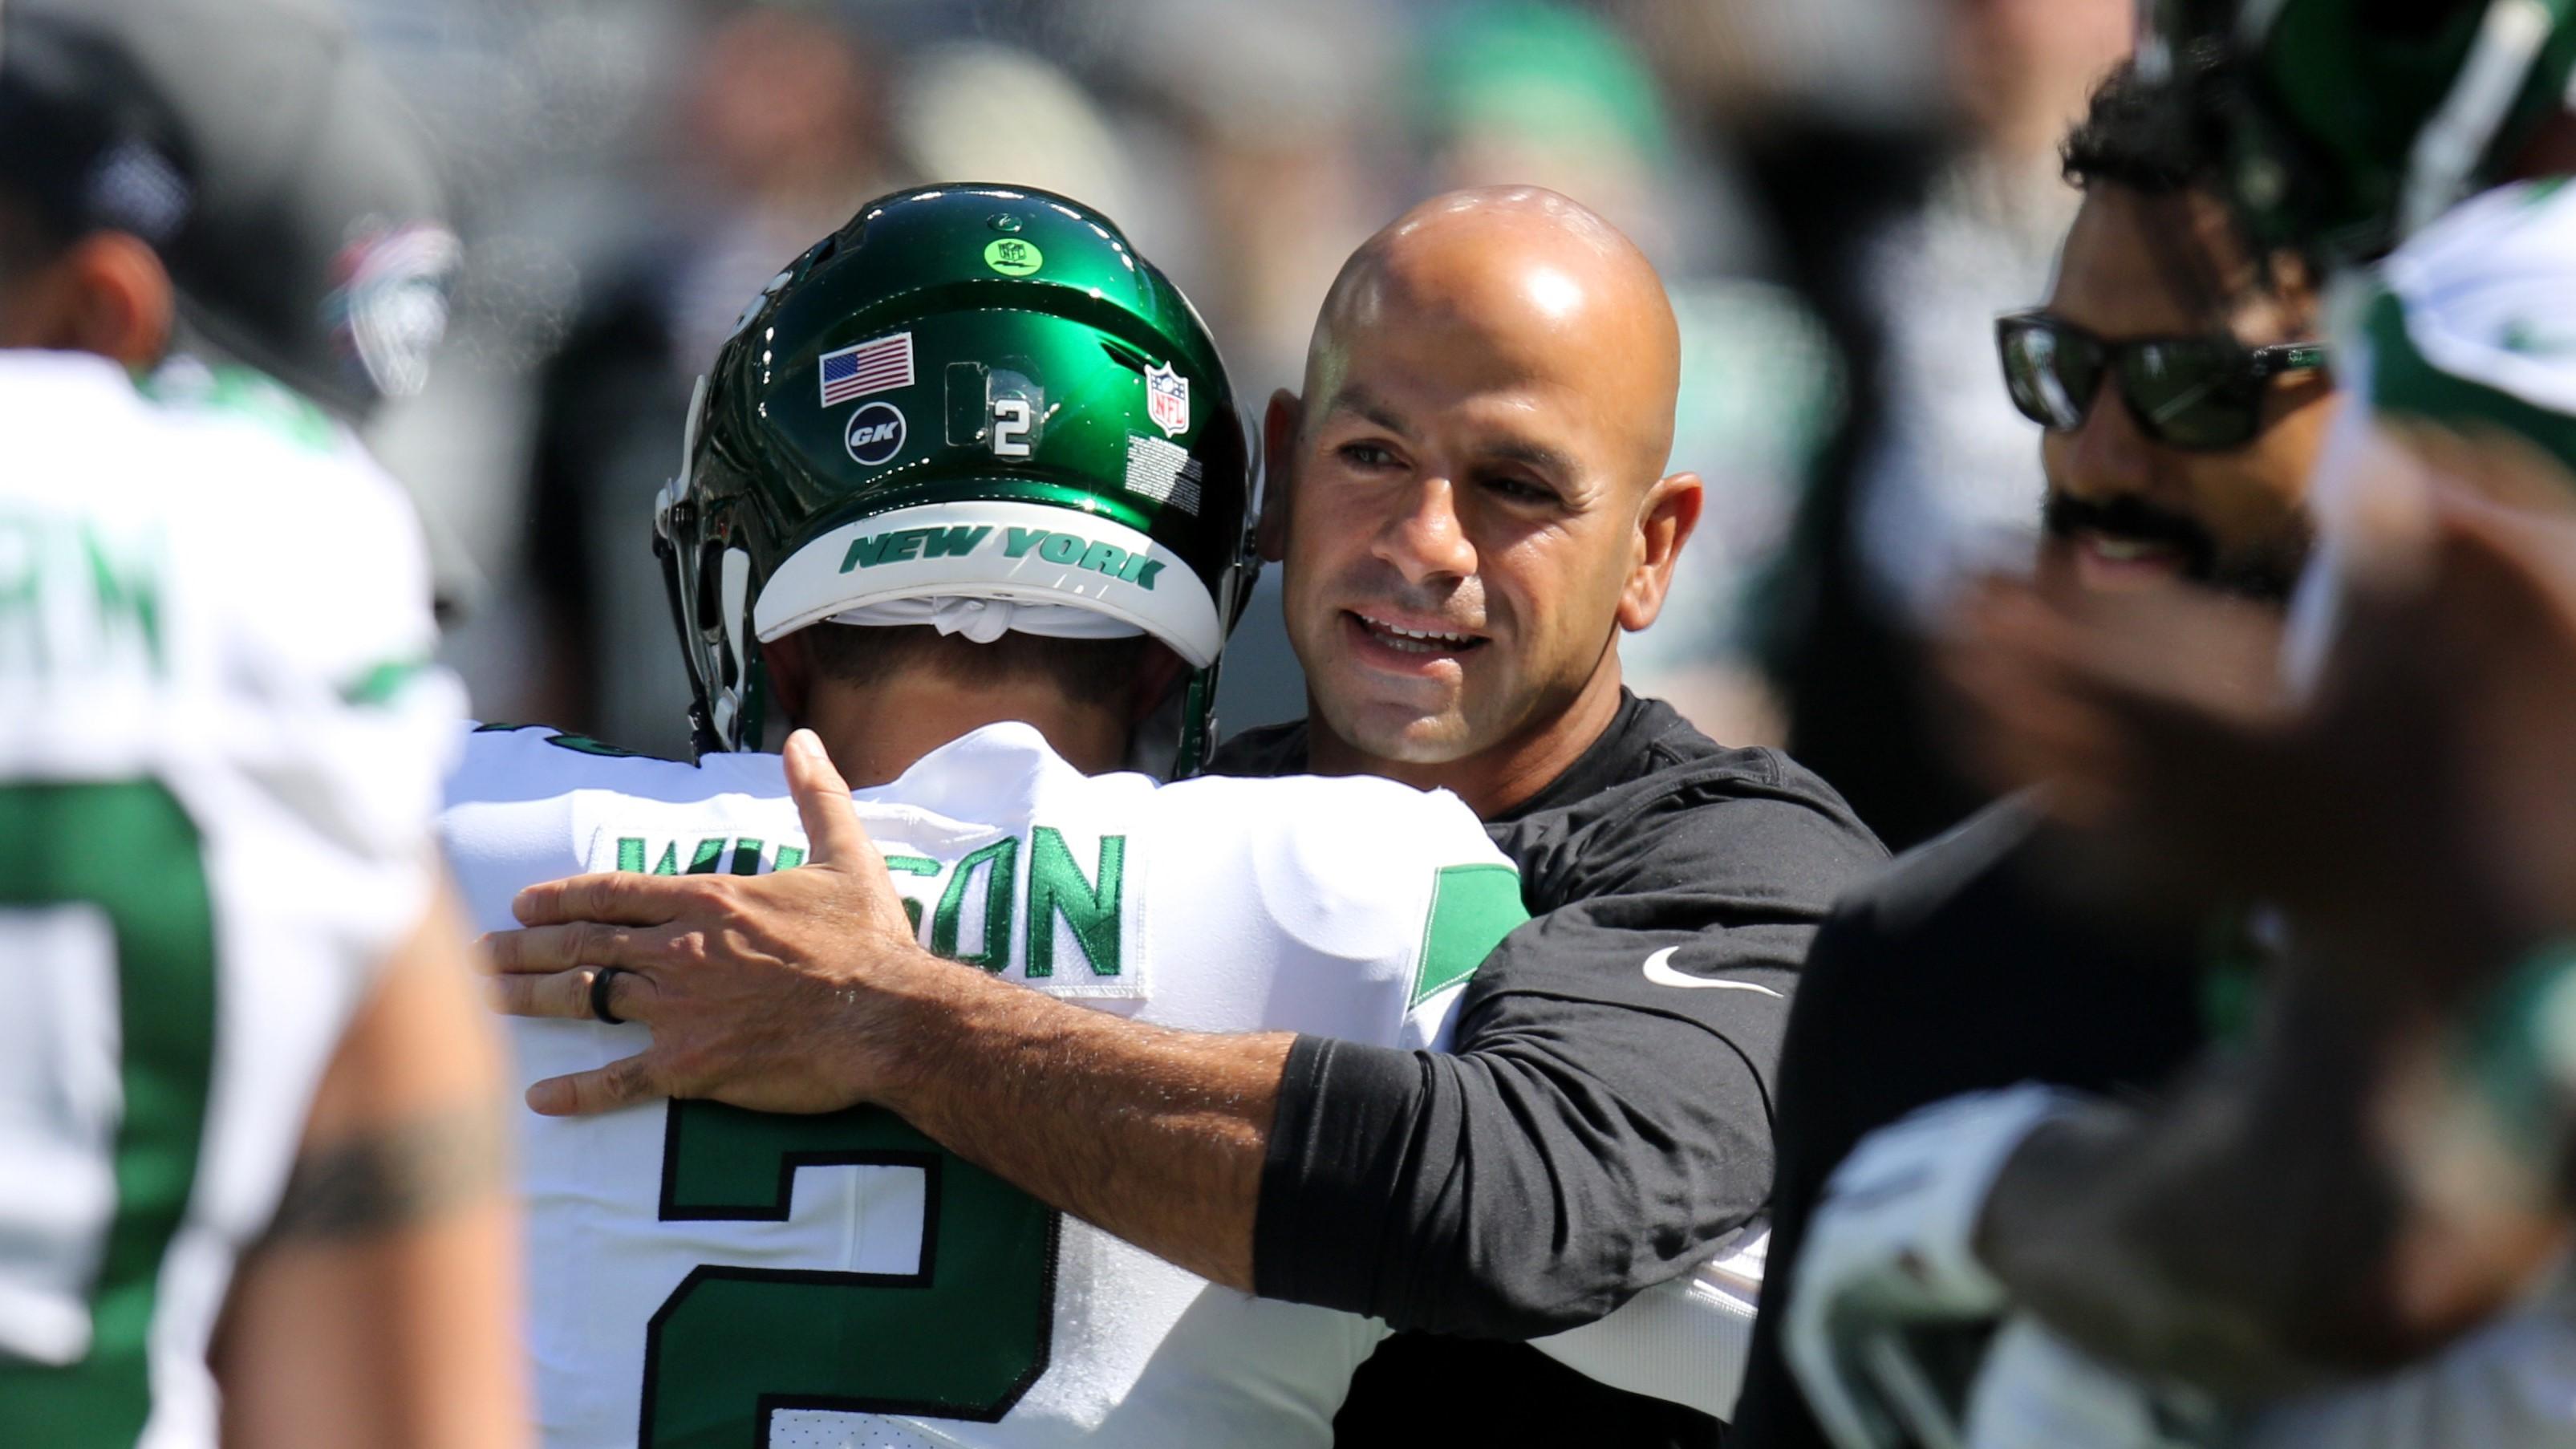 Oct 3, 2021; East Rutherford, NJ, USA; New York Jets head coach Robert Saleh hugs quarterback Zach Wilson before the game against the Tennessee Titans at MetLife Stadium. Mandatory Credit: Kevin R. Wexler-USA TODAY Sports / Kevin R. Wexler-USA TODAY Sports